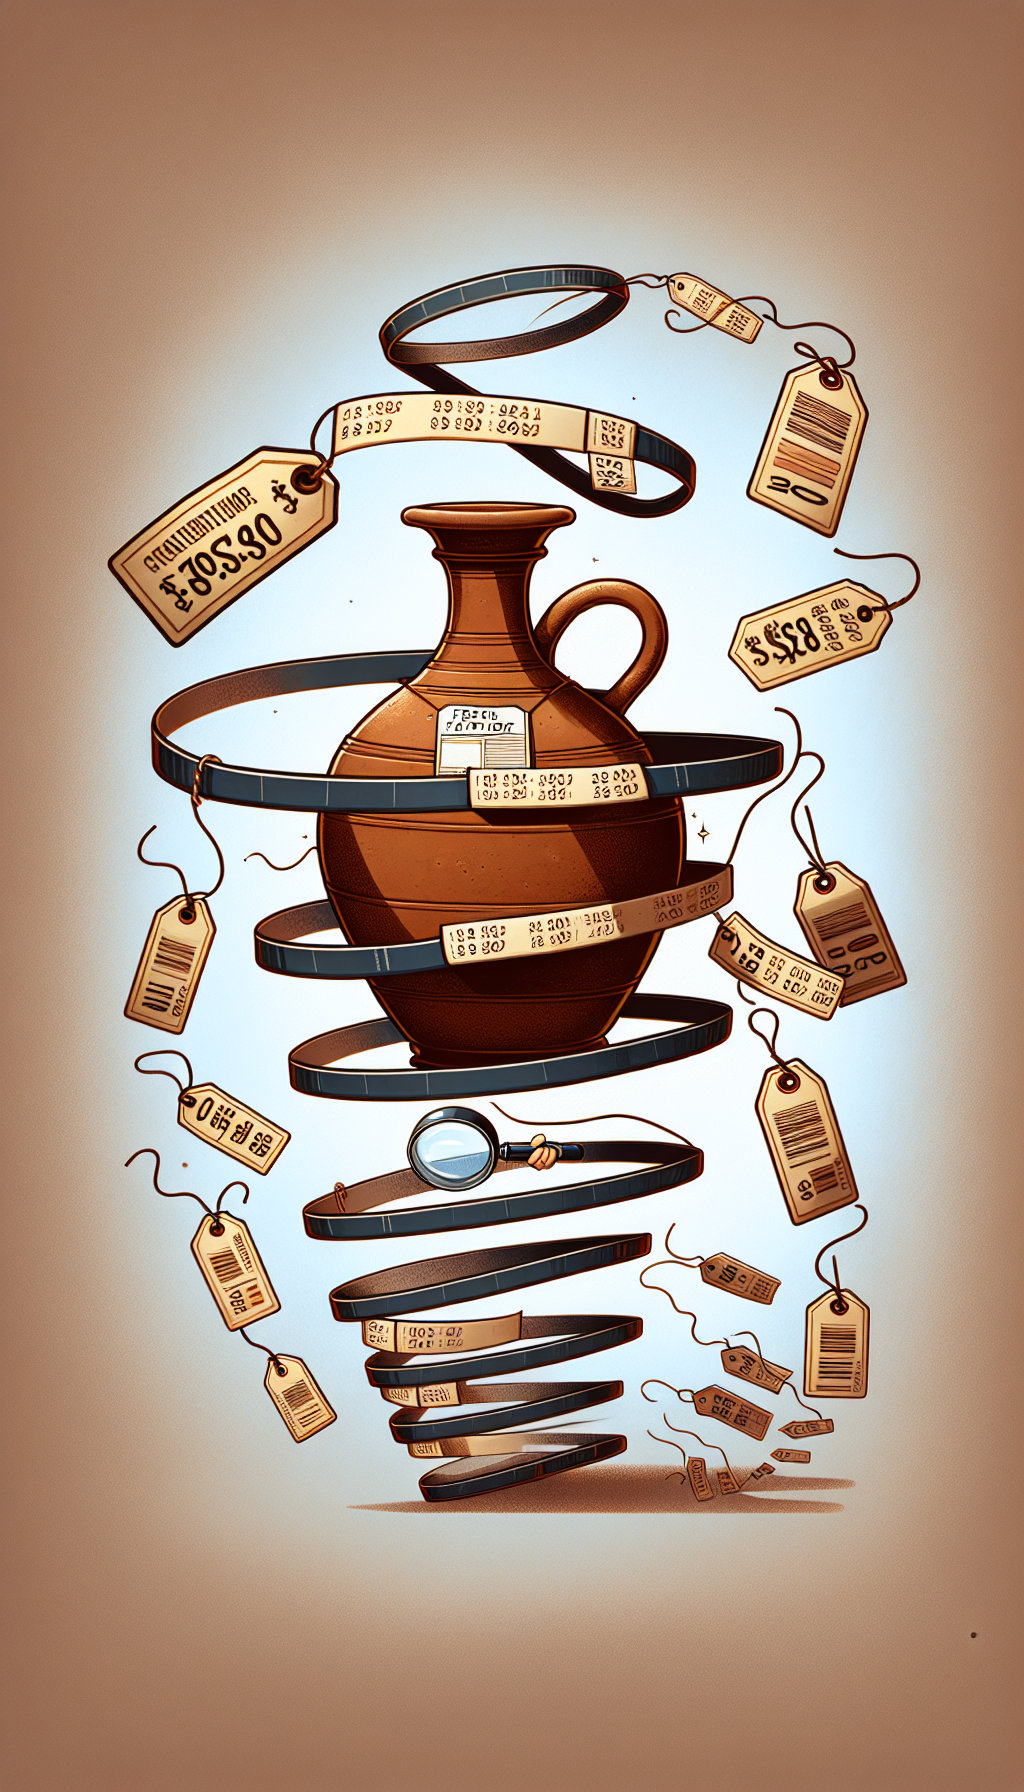 An illustration displays a whimsical timeline spiraling around an antique brown jug, with the dates of various eras etched alongside. A magnifying glass hovers over the jug, focusing on a label that reads "Age Factor" with the jug's estimated era highlighted. Scattered around are price tags that gradually increase as they approach the jug, symbolizing its growing value with age.